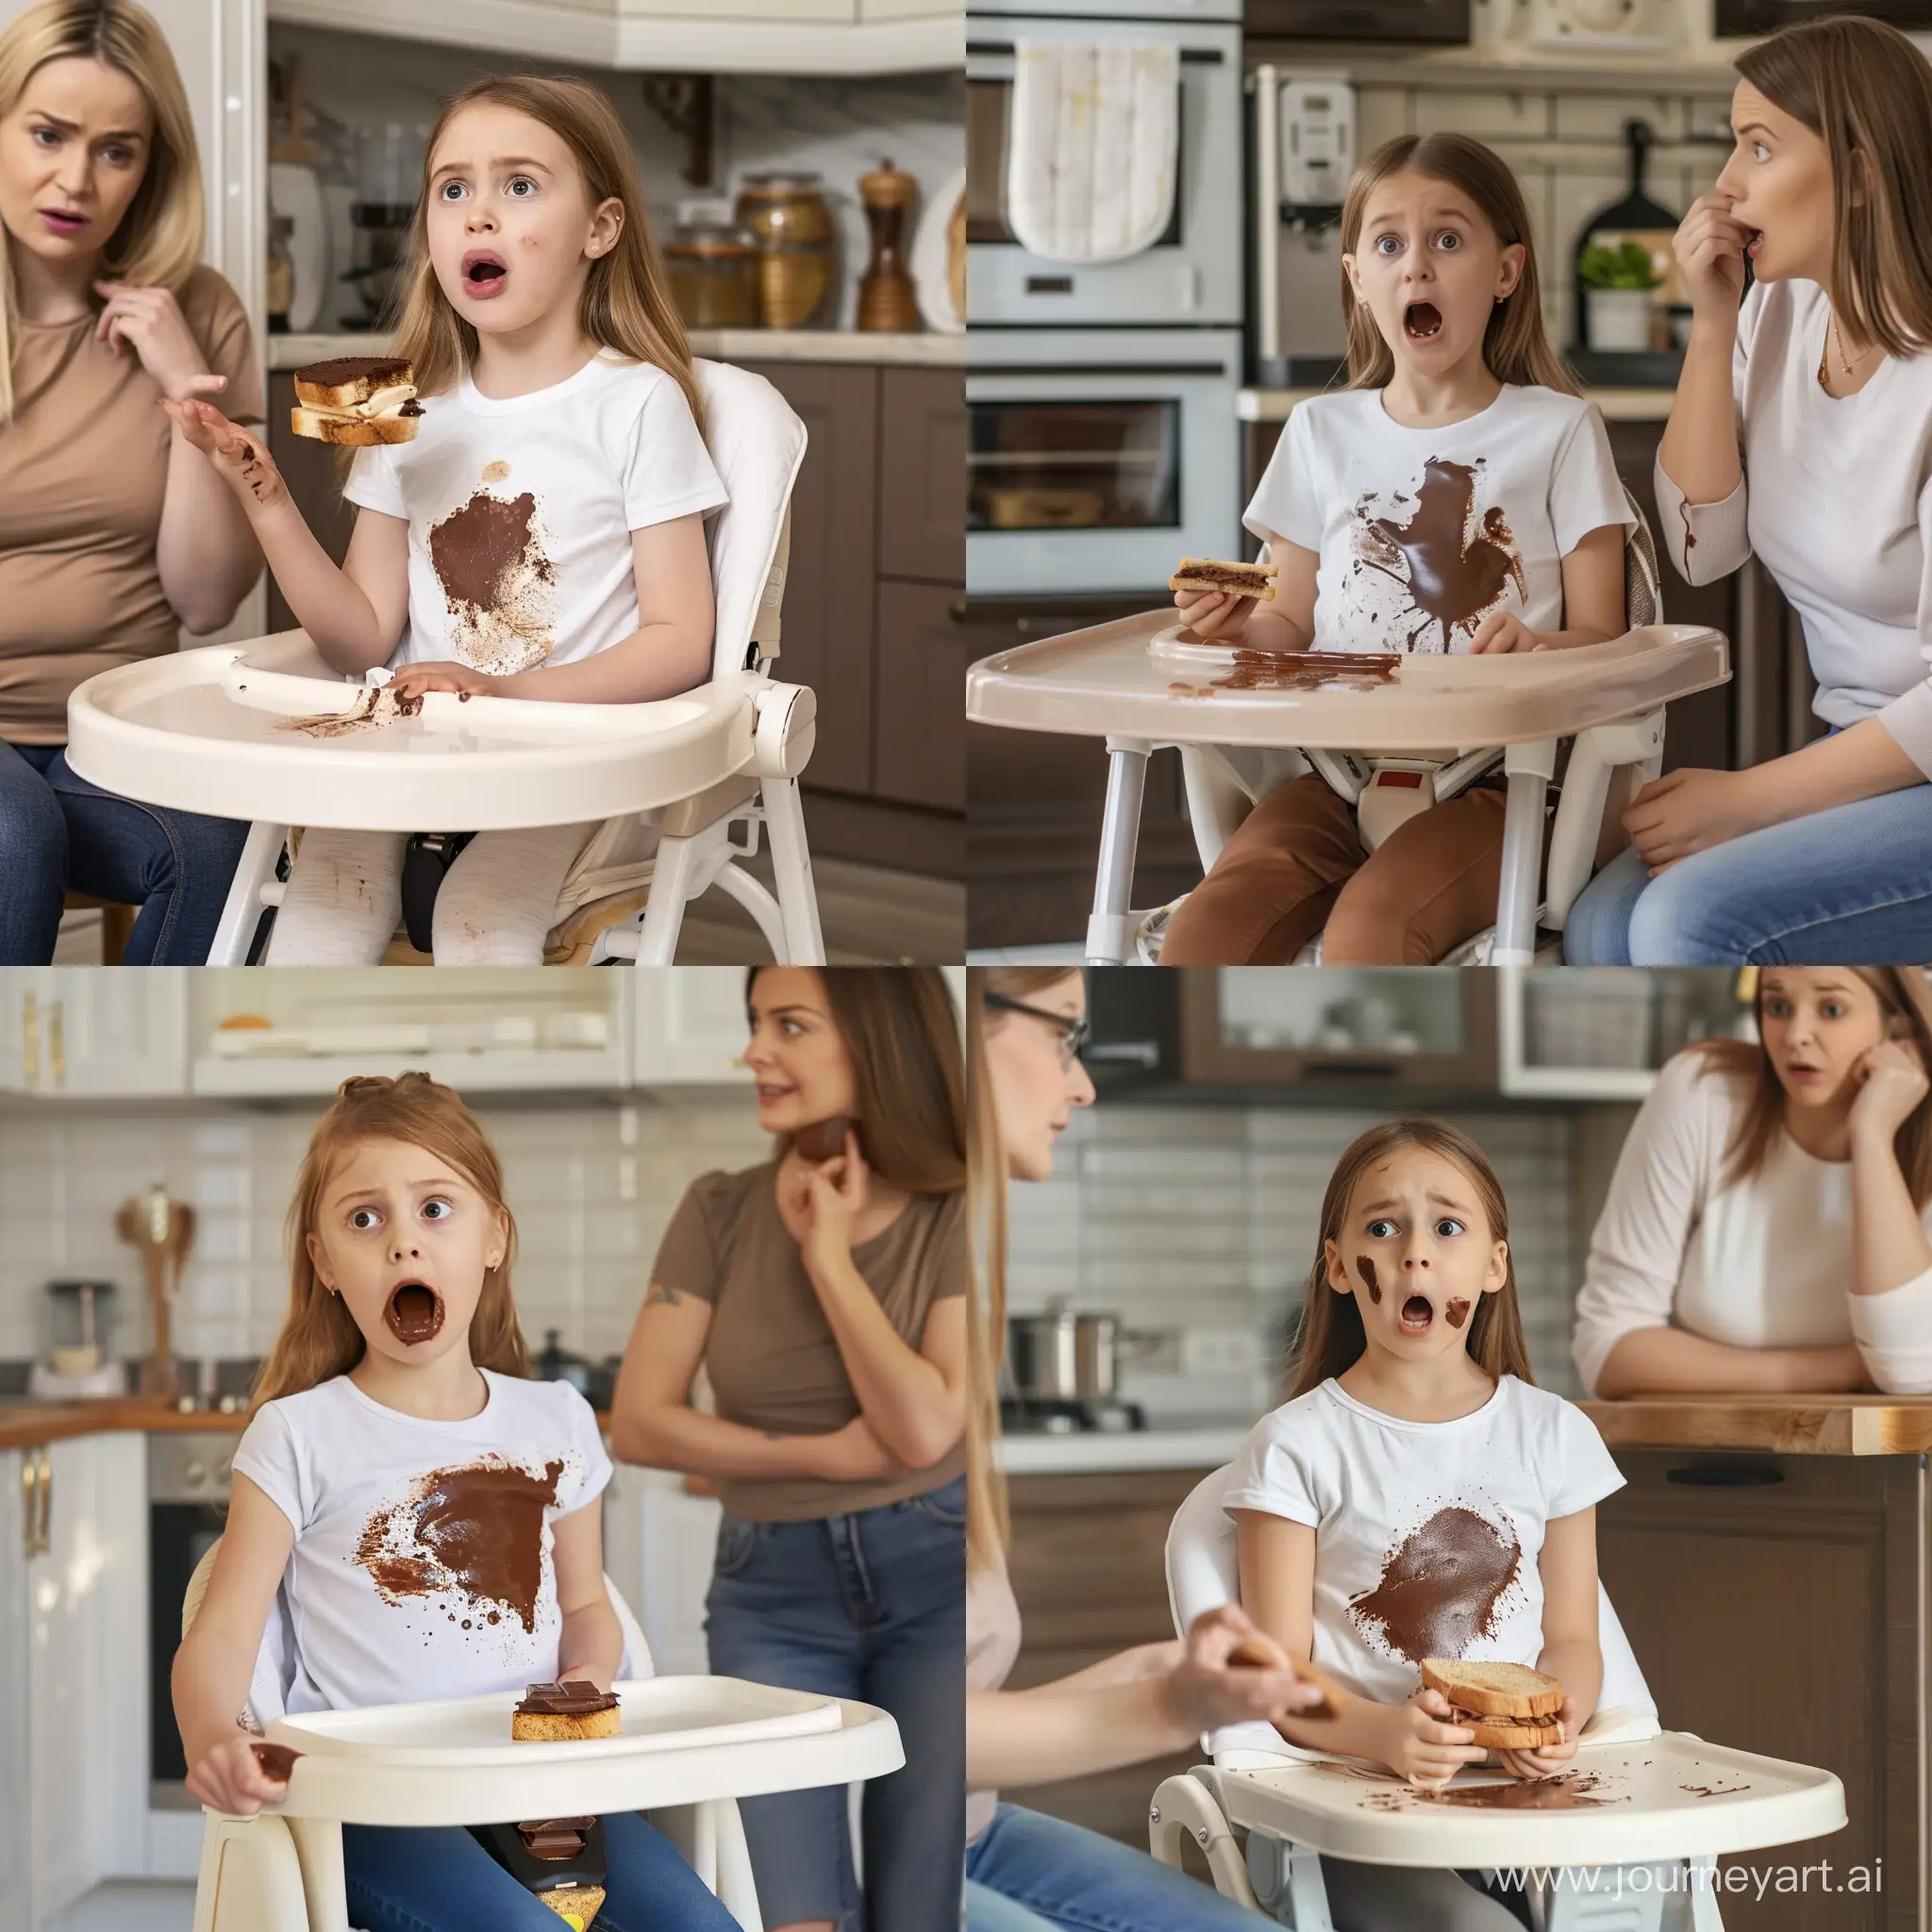 young girl sitting on highchair in kitchen, holding chocolate sandwich, a chocolate stain is on the girl's t-shirt, the girl is shocked,  mother is next to her thinking
